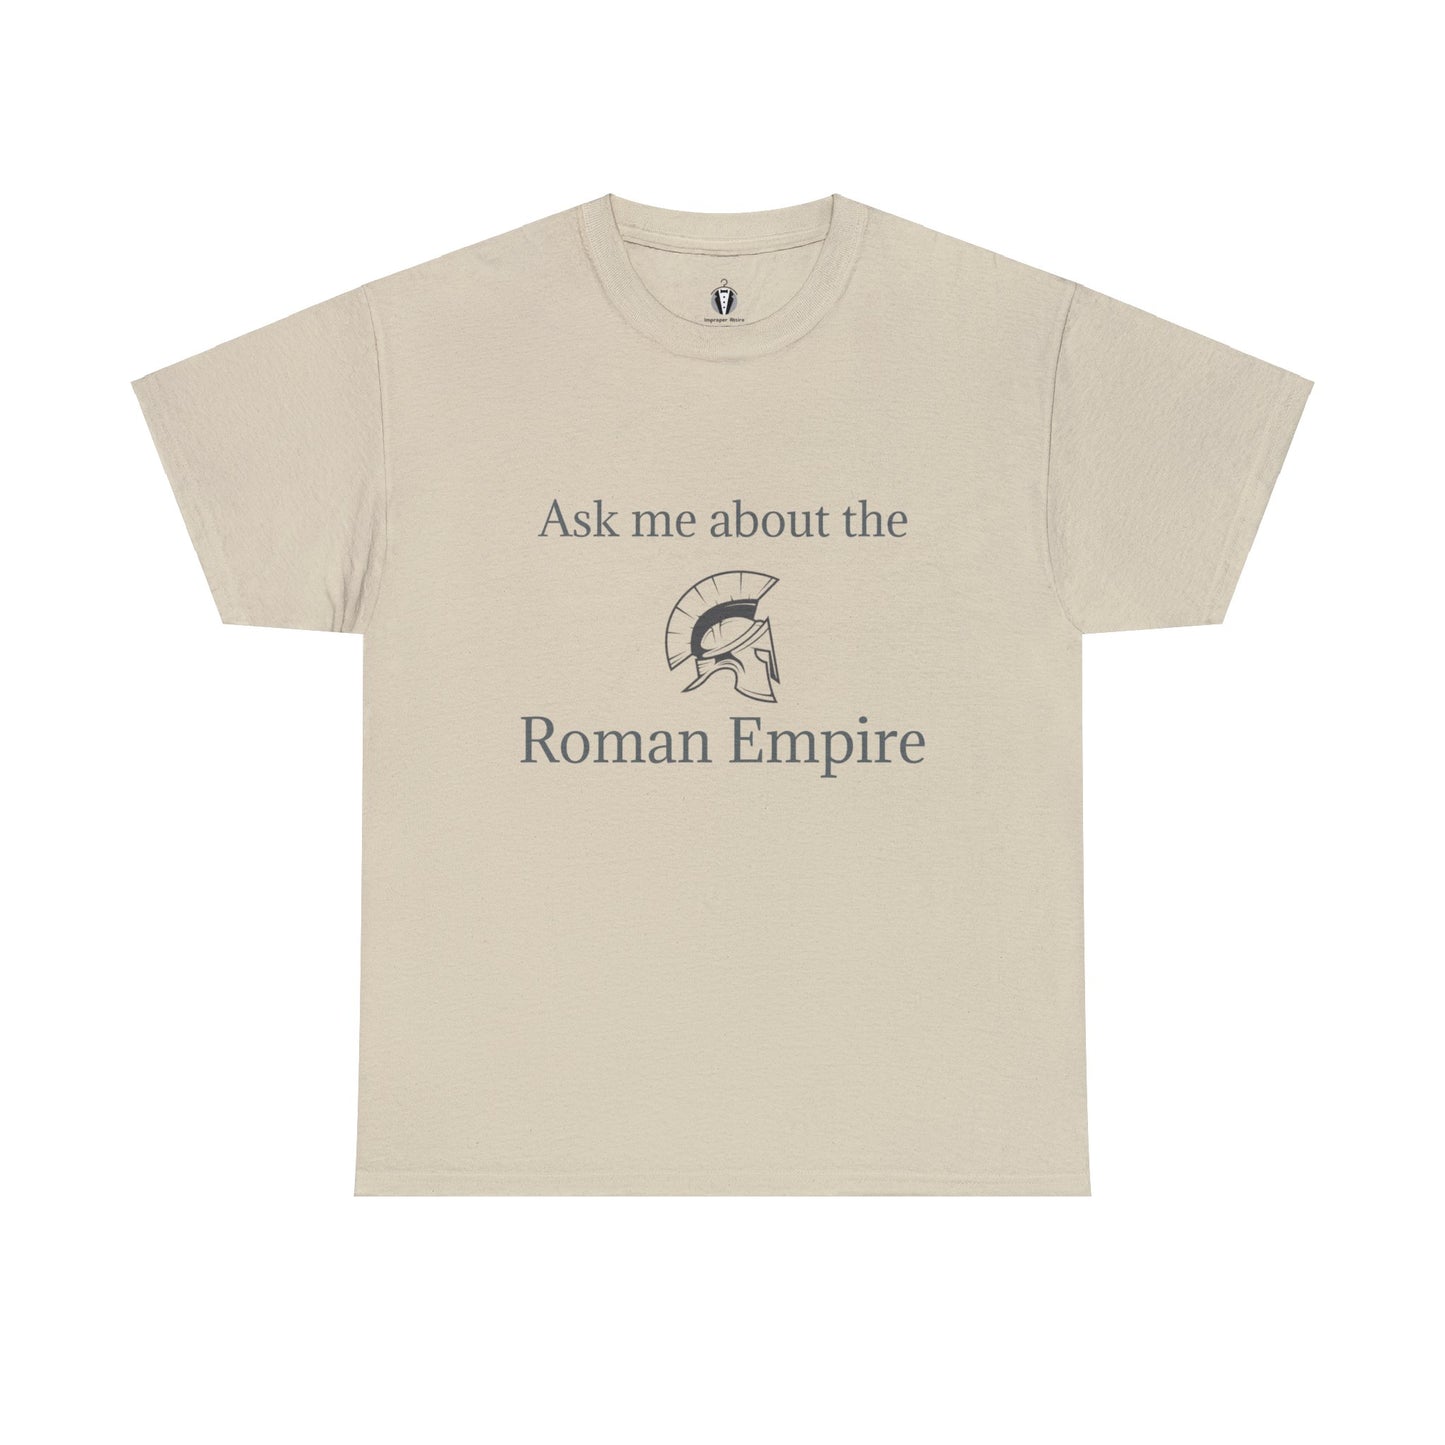 "Ask me about the Roman Empire" - Tee